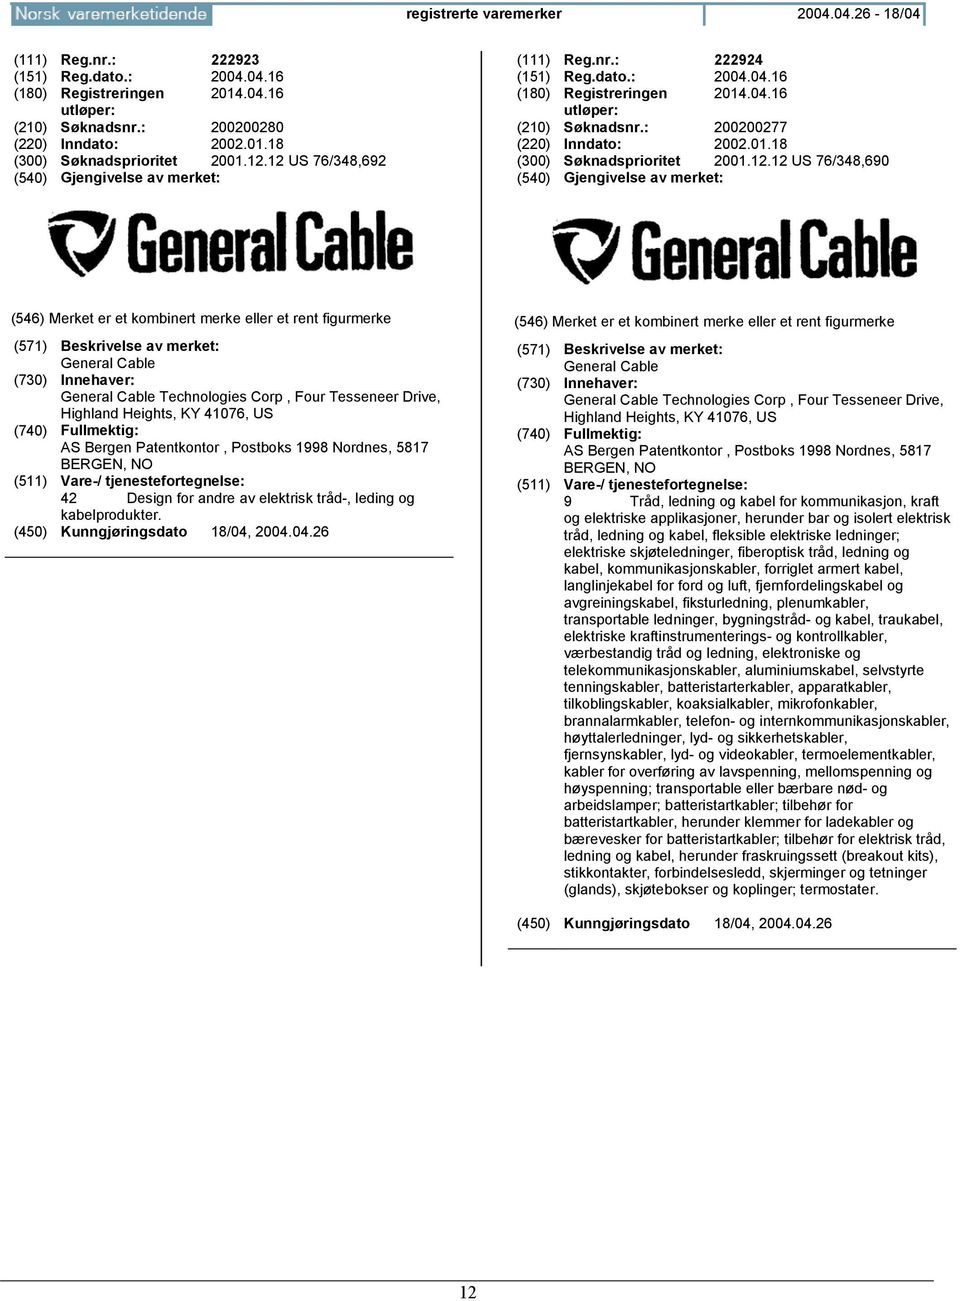 76/348,690 General Cable General Cable Technologies Corp, Four Tesseneer Drive, Highland Heights, KY 41076, US AS Bergen Patentkontor, Postboks 1998 Nordnes, 5817 BERGEN, NO 42 Design for andre av